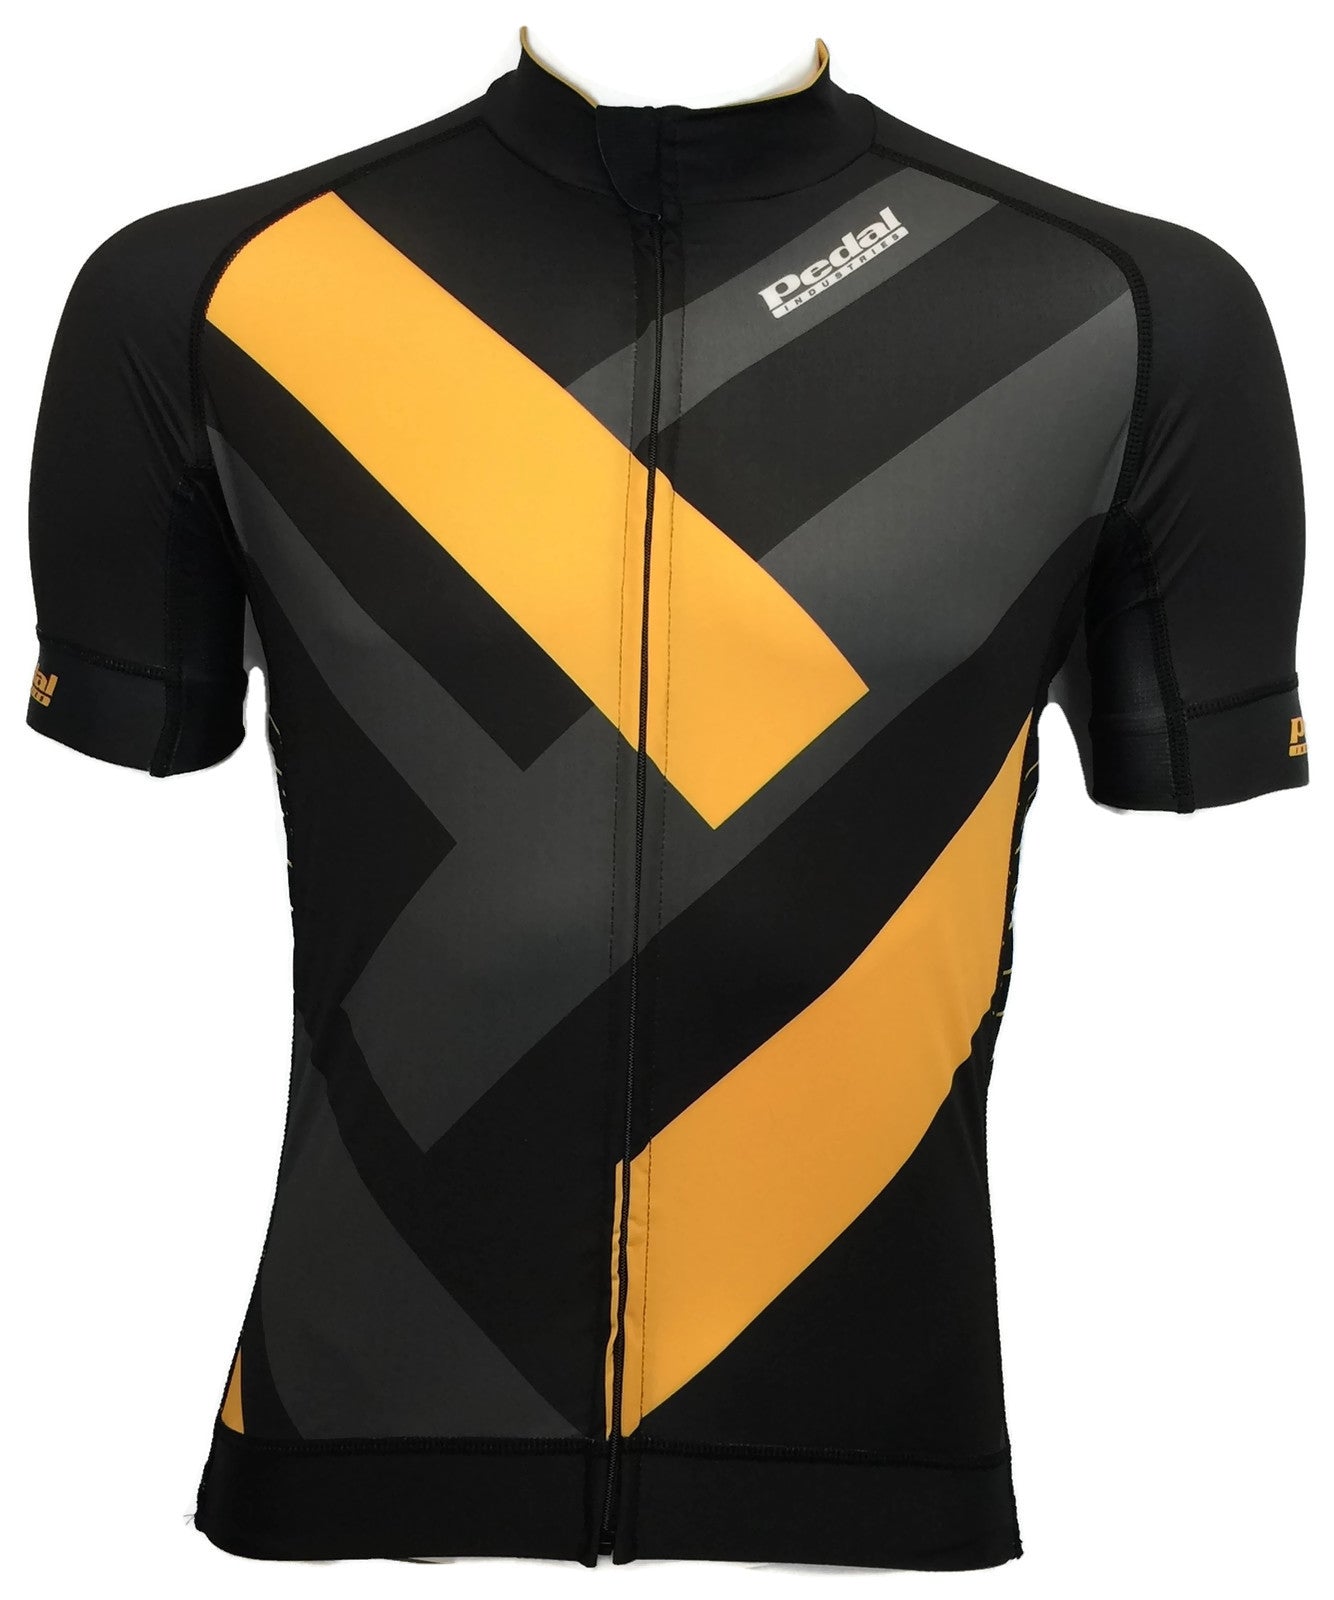 2018 PEDAL SPEED JERSEY